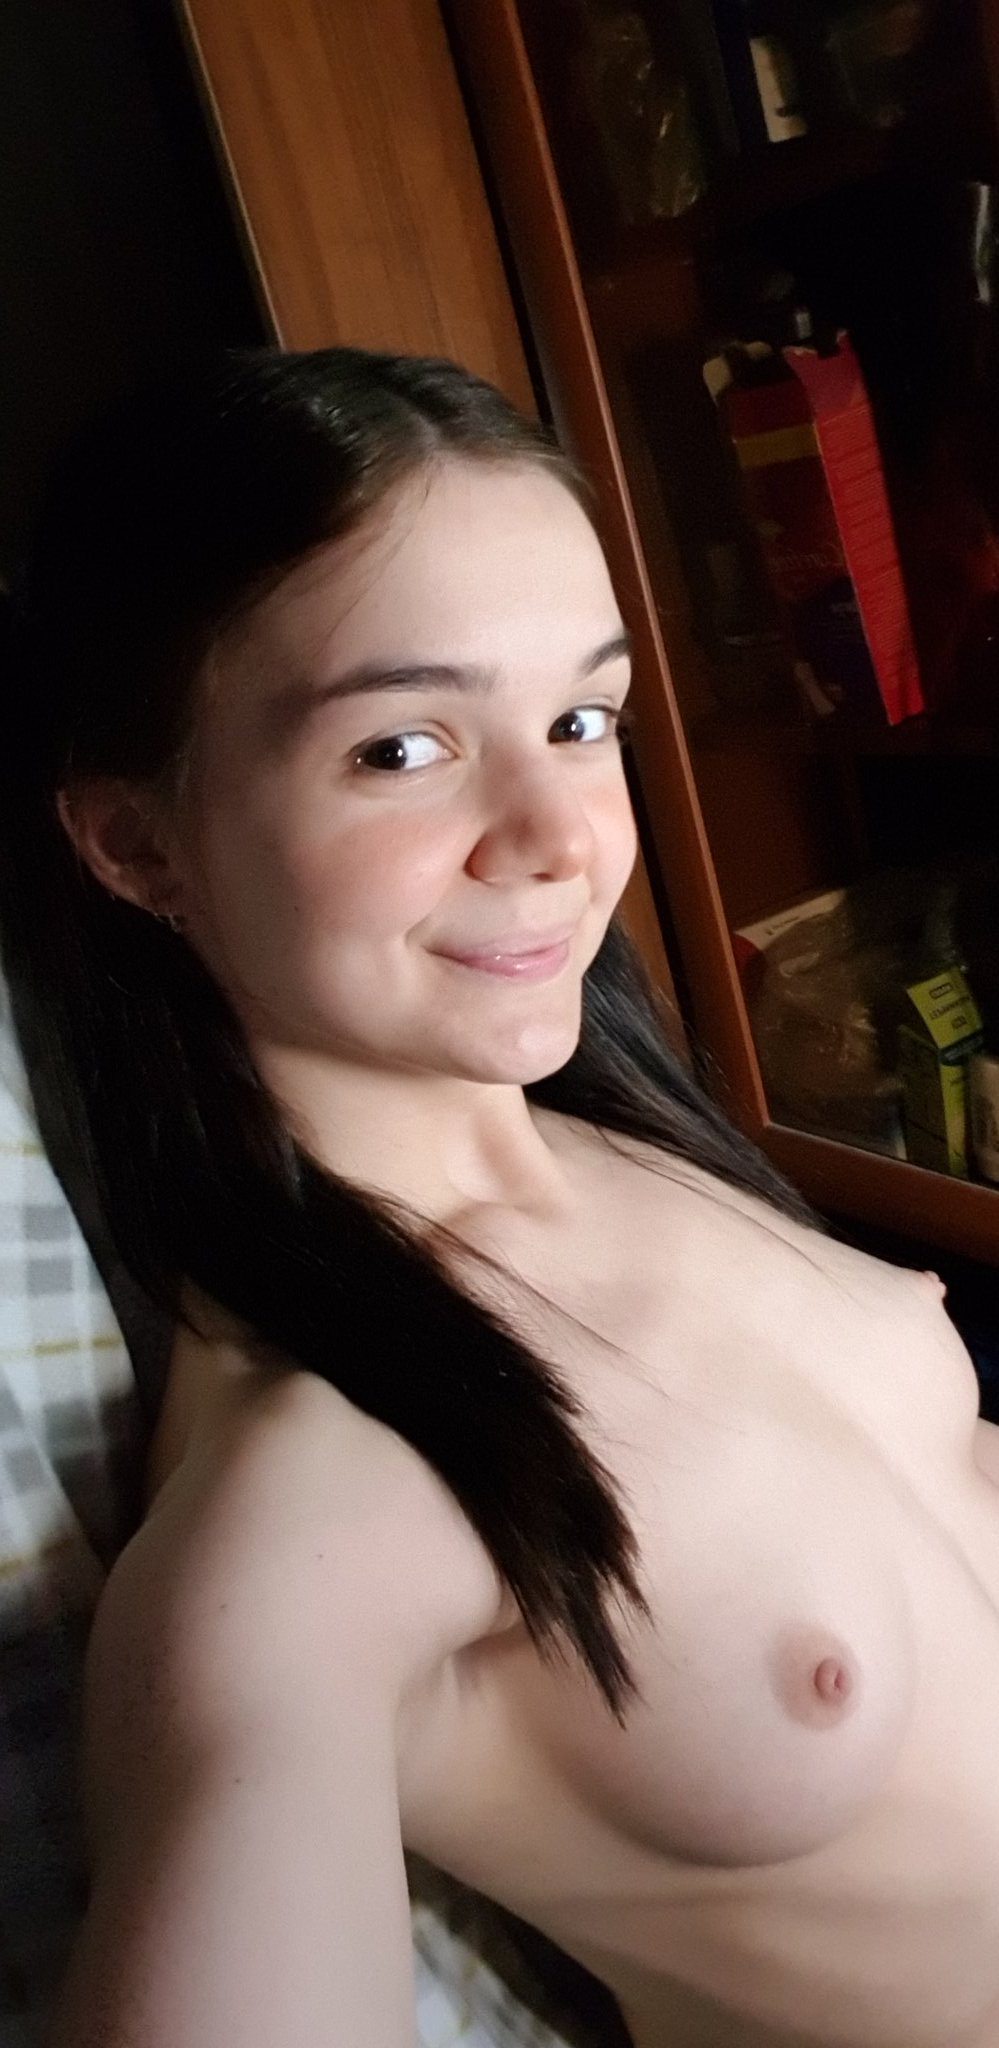 Imagen etiquetada con: Brunette, Camgirl, Chaturbate, MeowMeowMay, OnlyFans, Small Tits